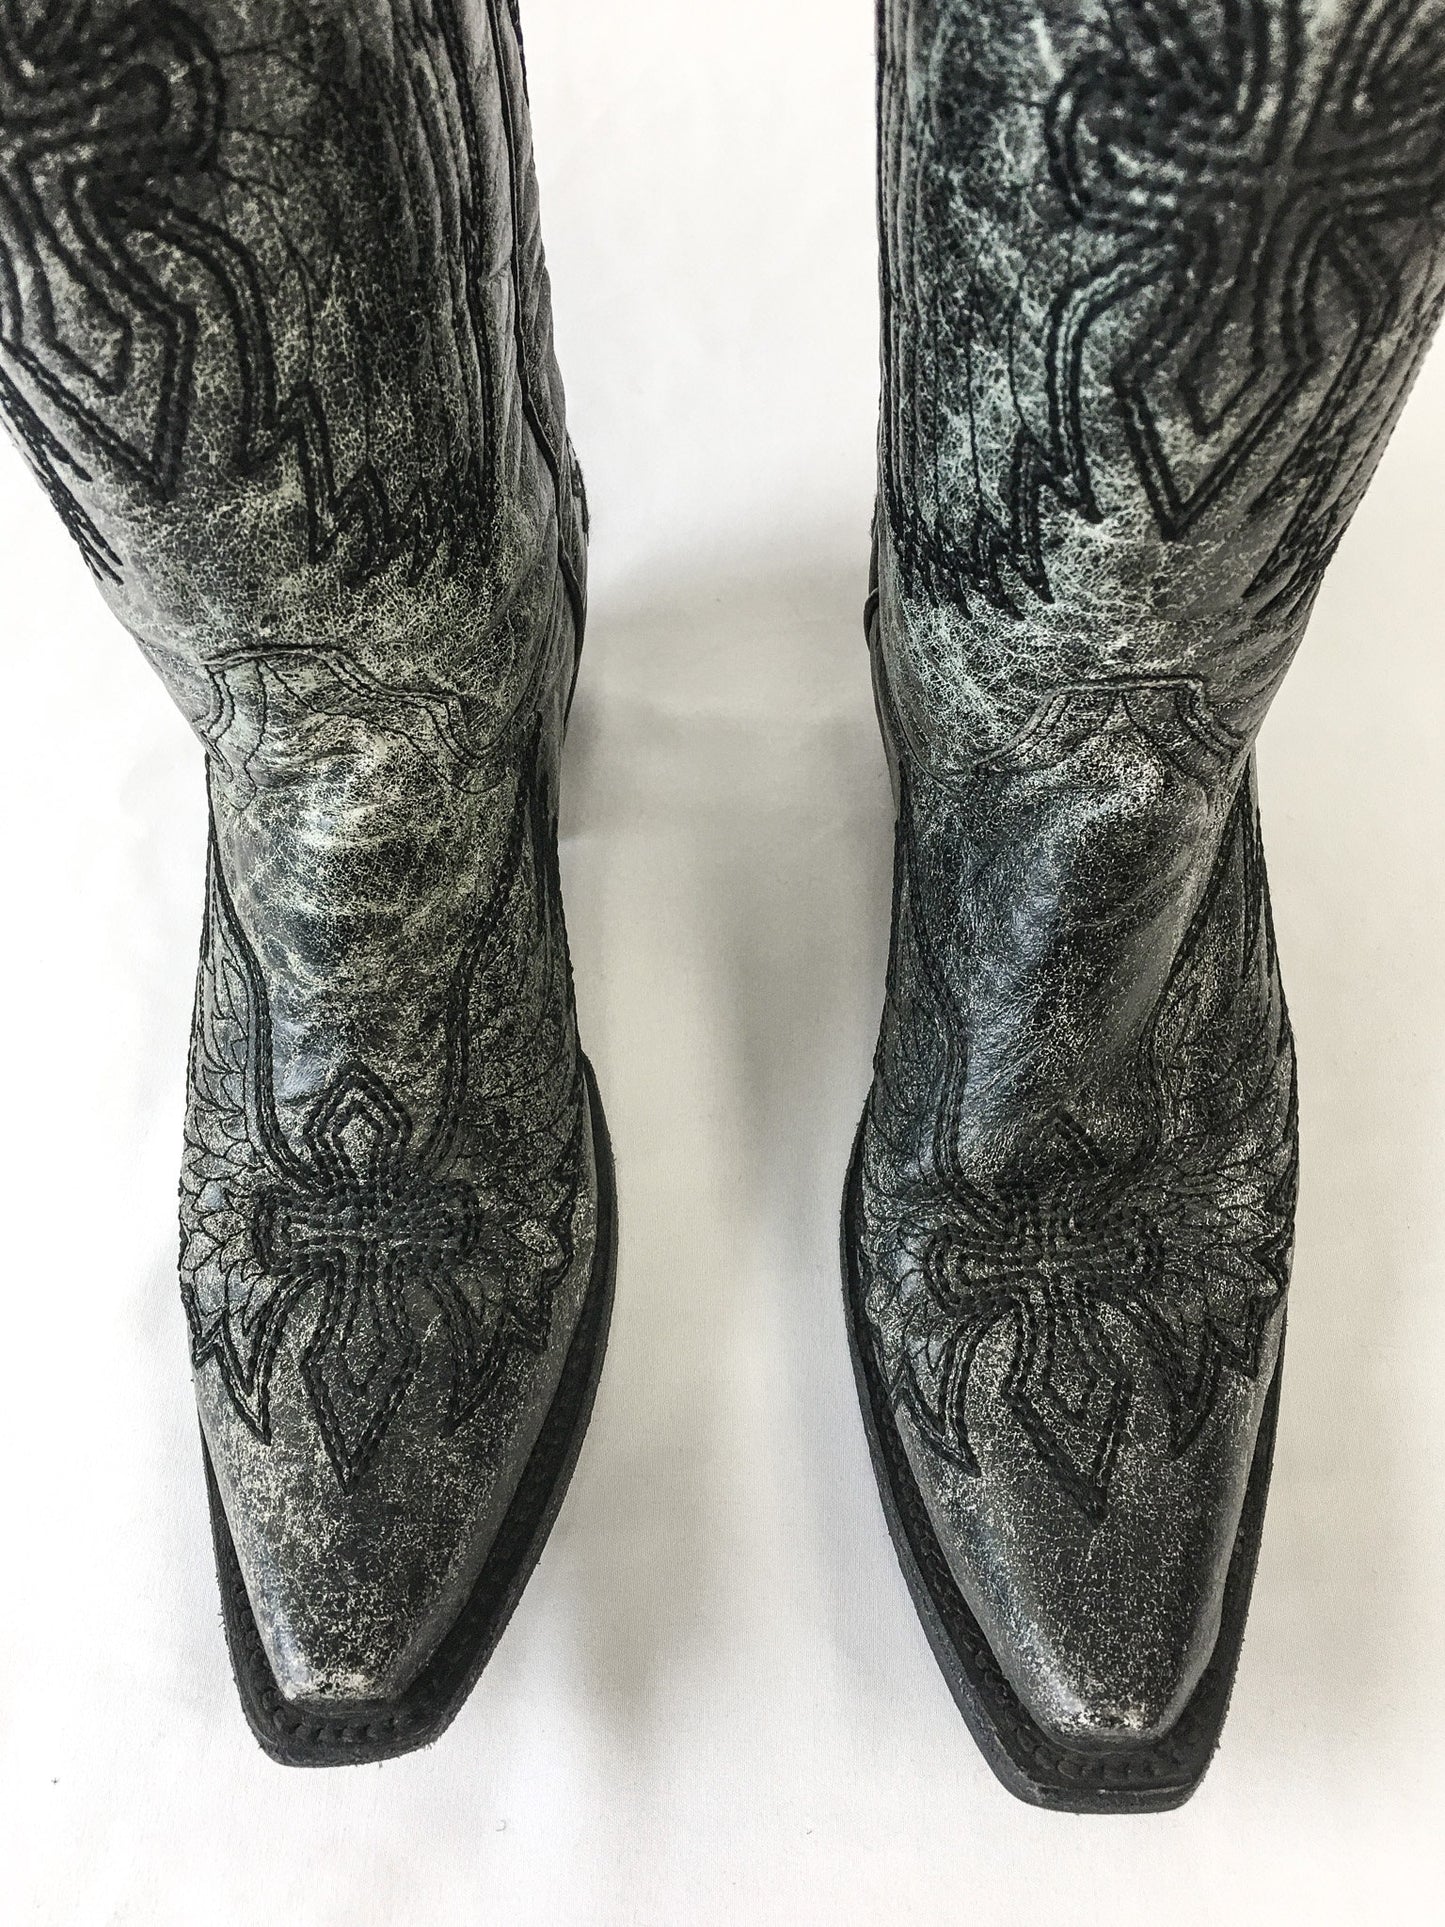 Vintage Inspired Corral Circle G Black & Gray/Green Wing and Cross Embroidered Leather Cowboy Boots, Women's Sz. 6.5M